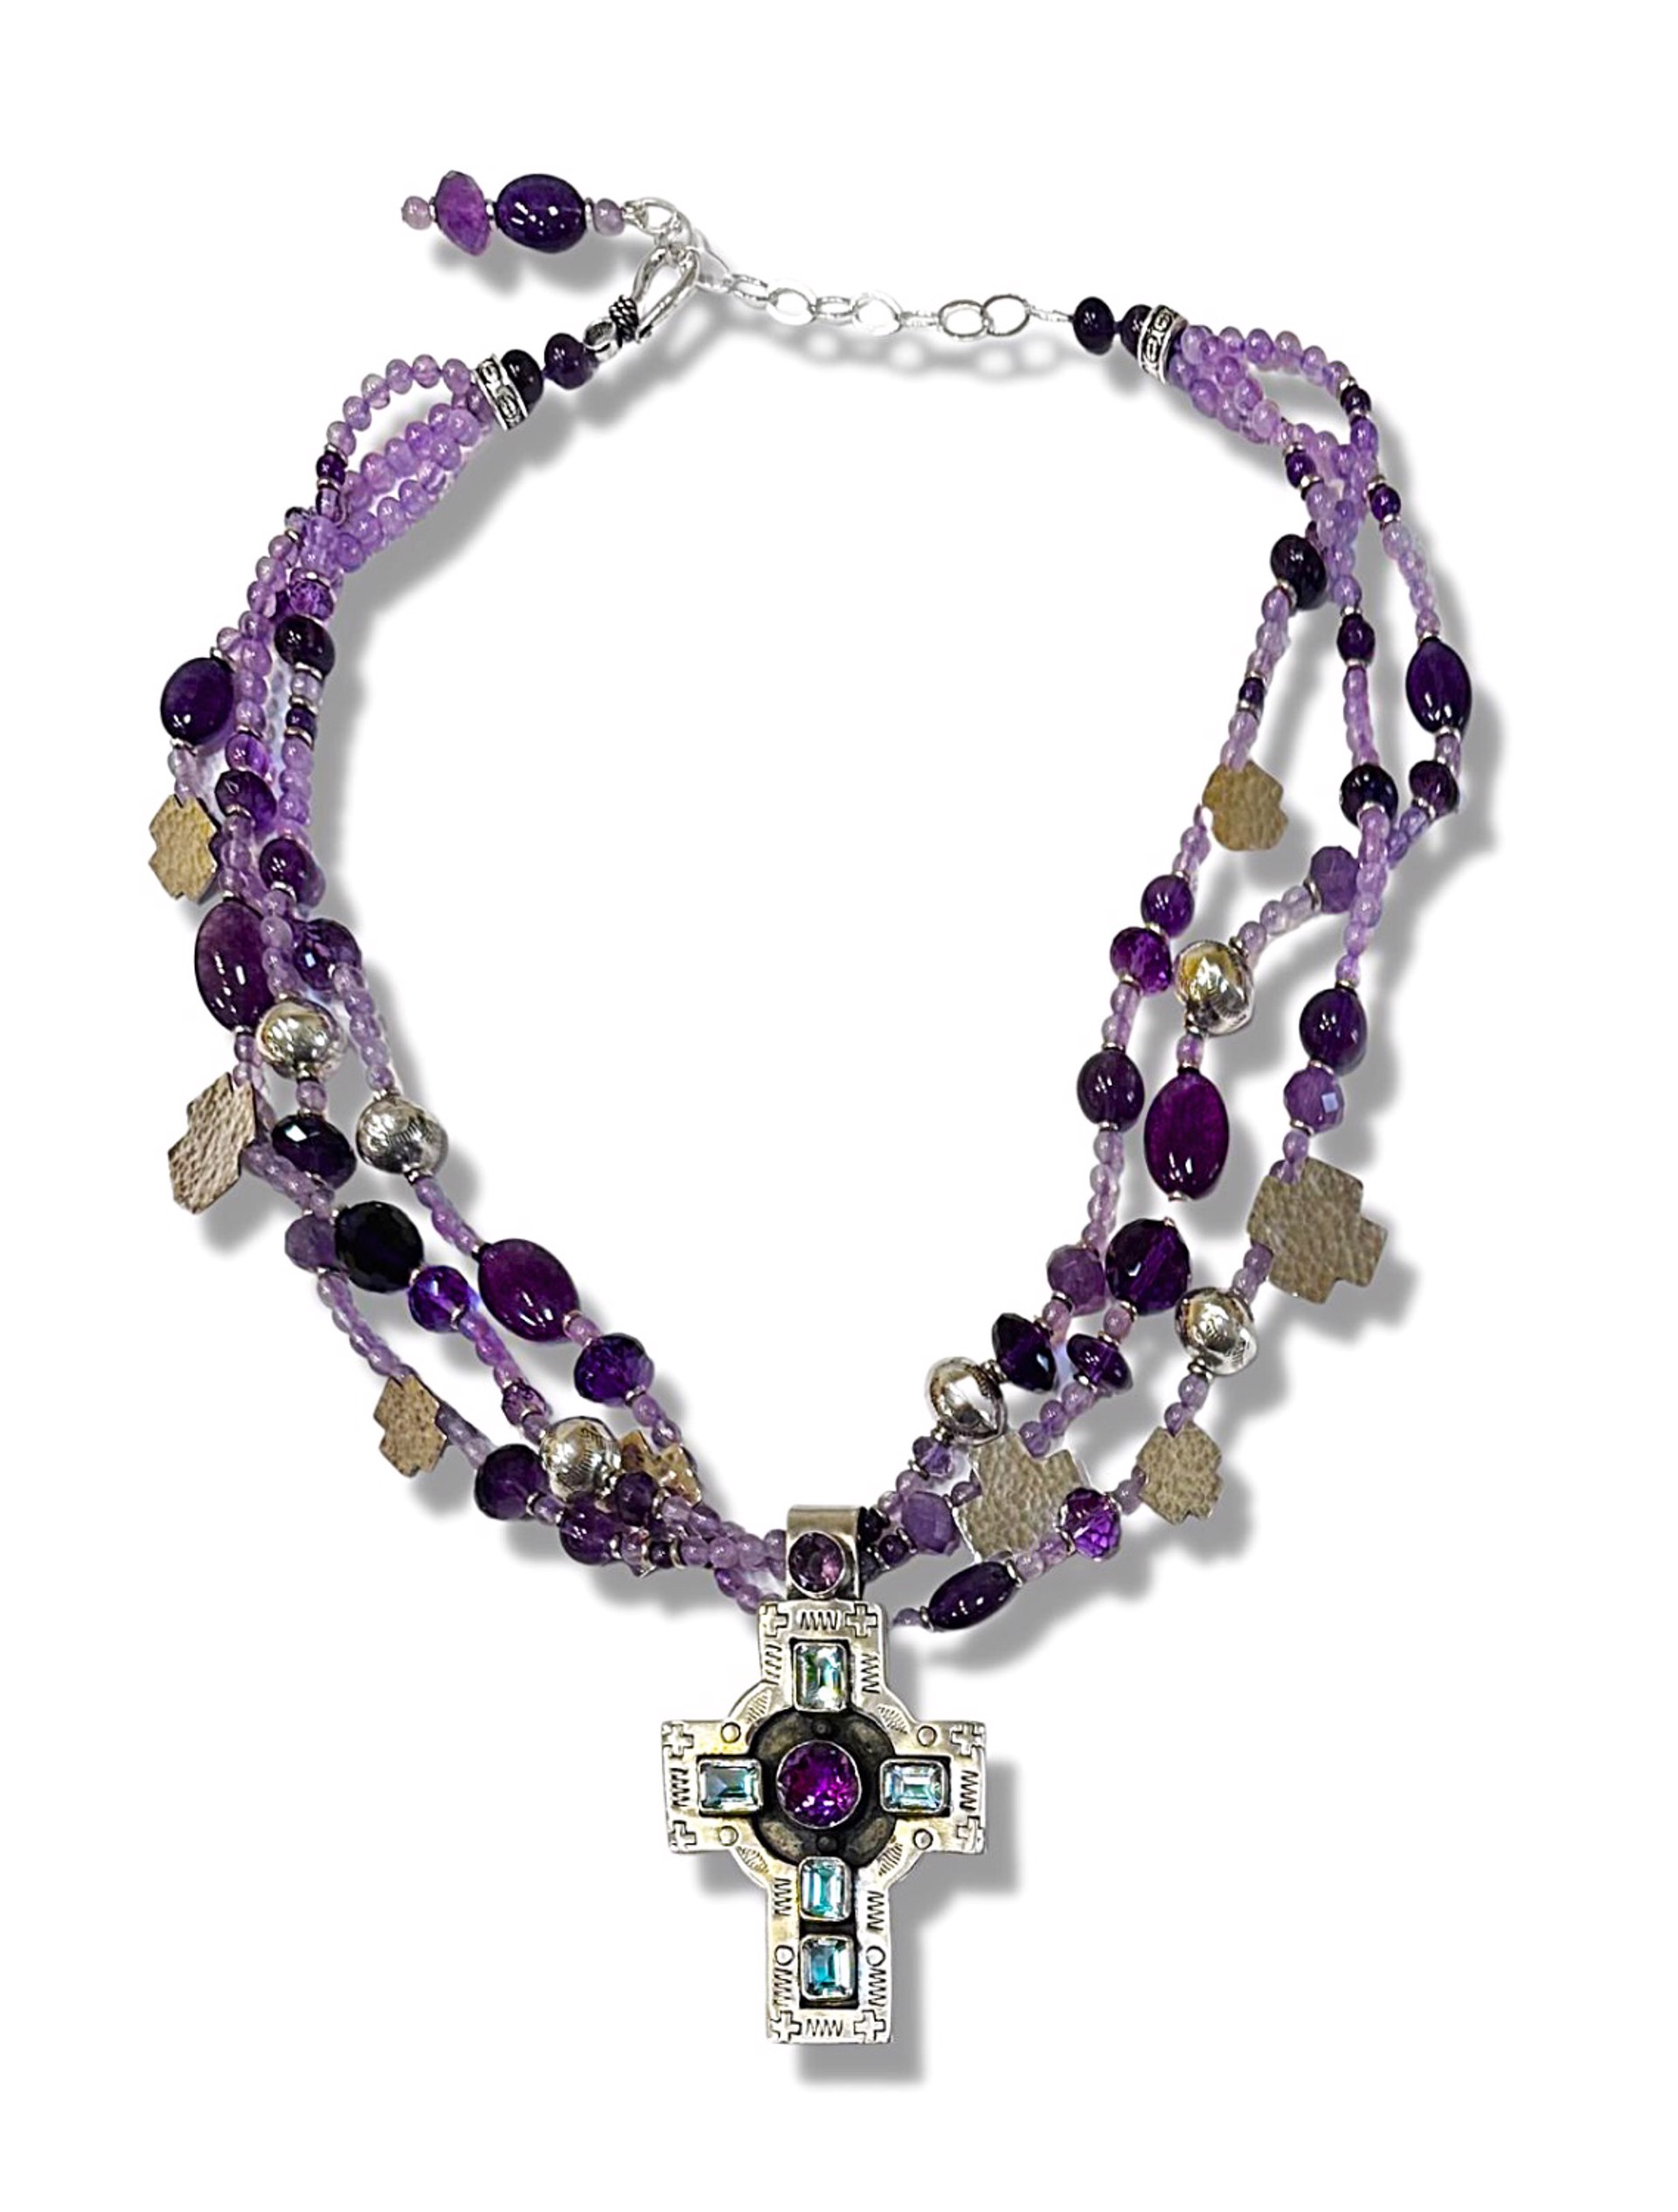 KY 1465 Three Strand Amethyst and Sterling Silver Necklace by Kim Yubeta